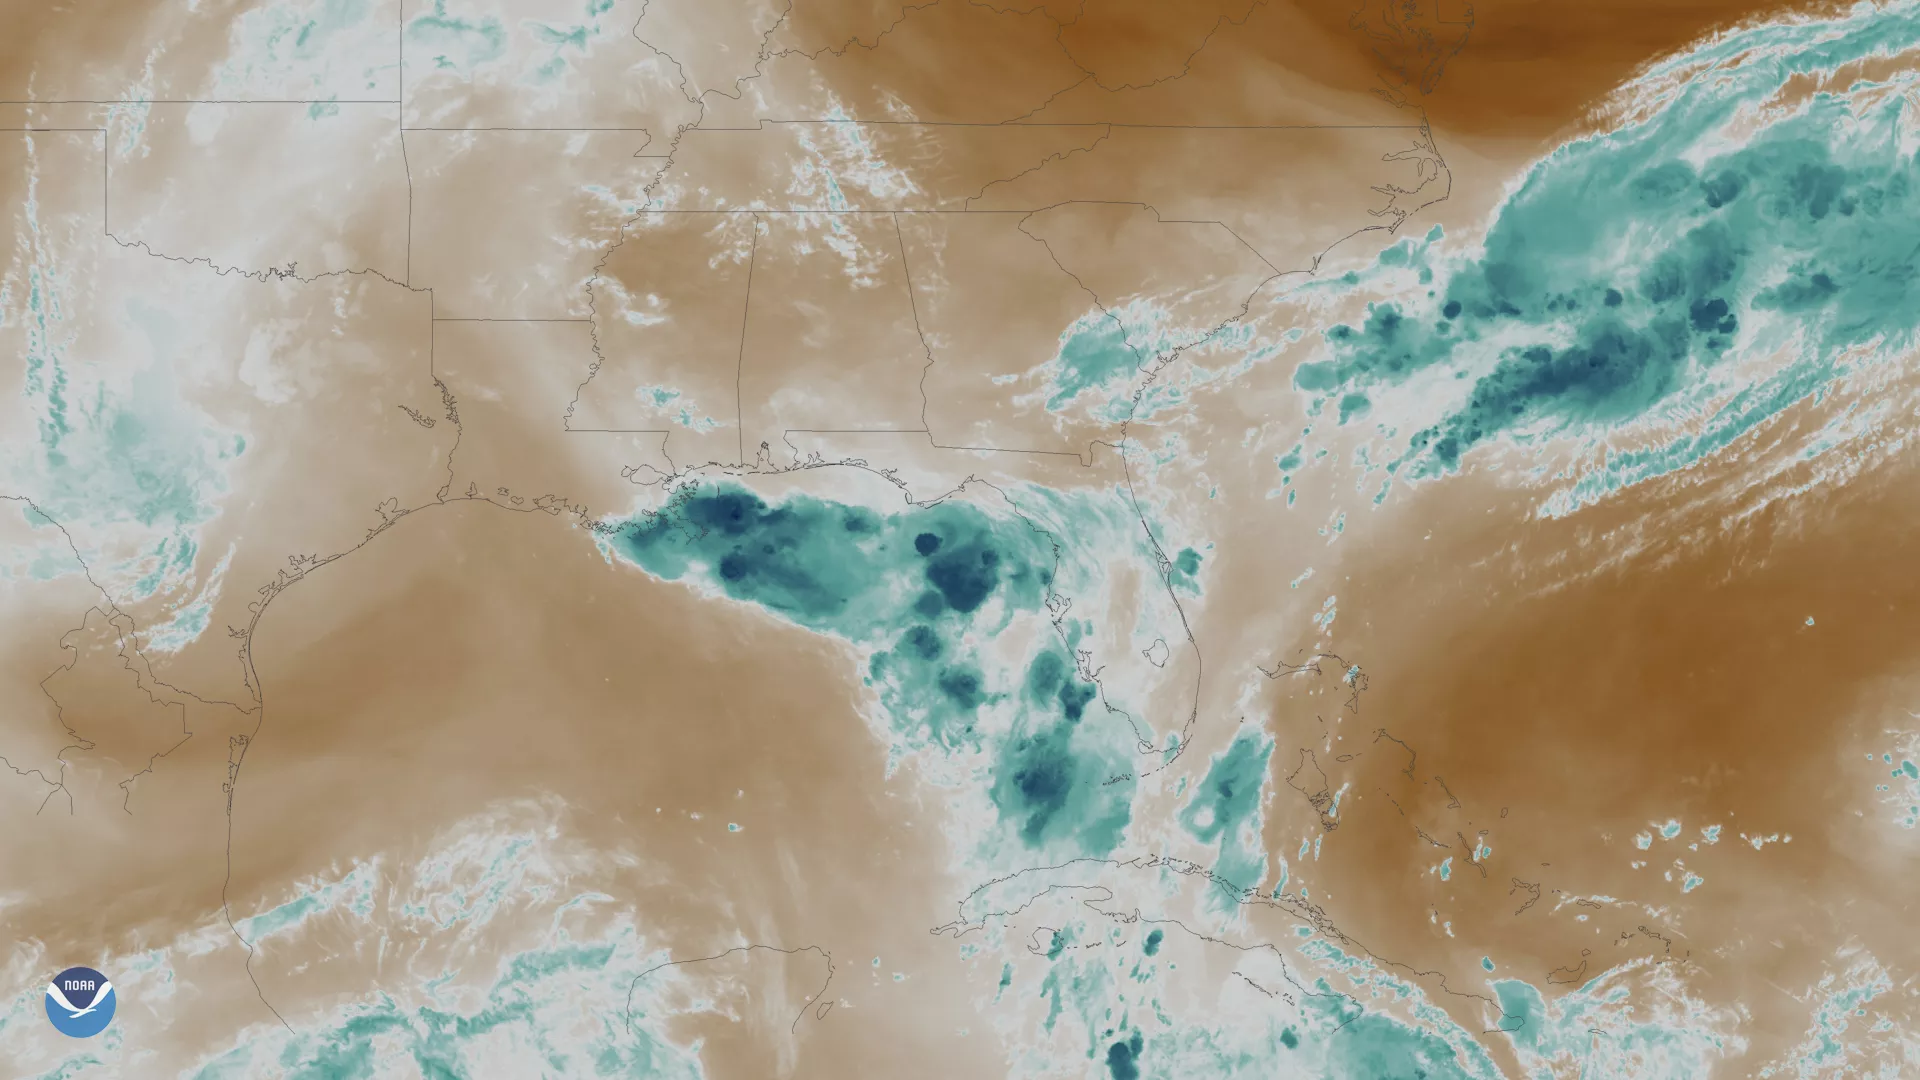 A broad area of low pressure in  the Gulf of Mexico, from July 9, 2019, via water vapor imagery from GOES East,